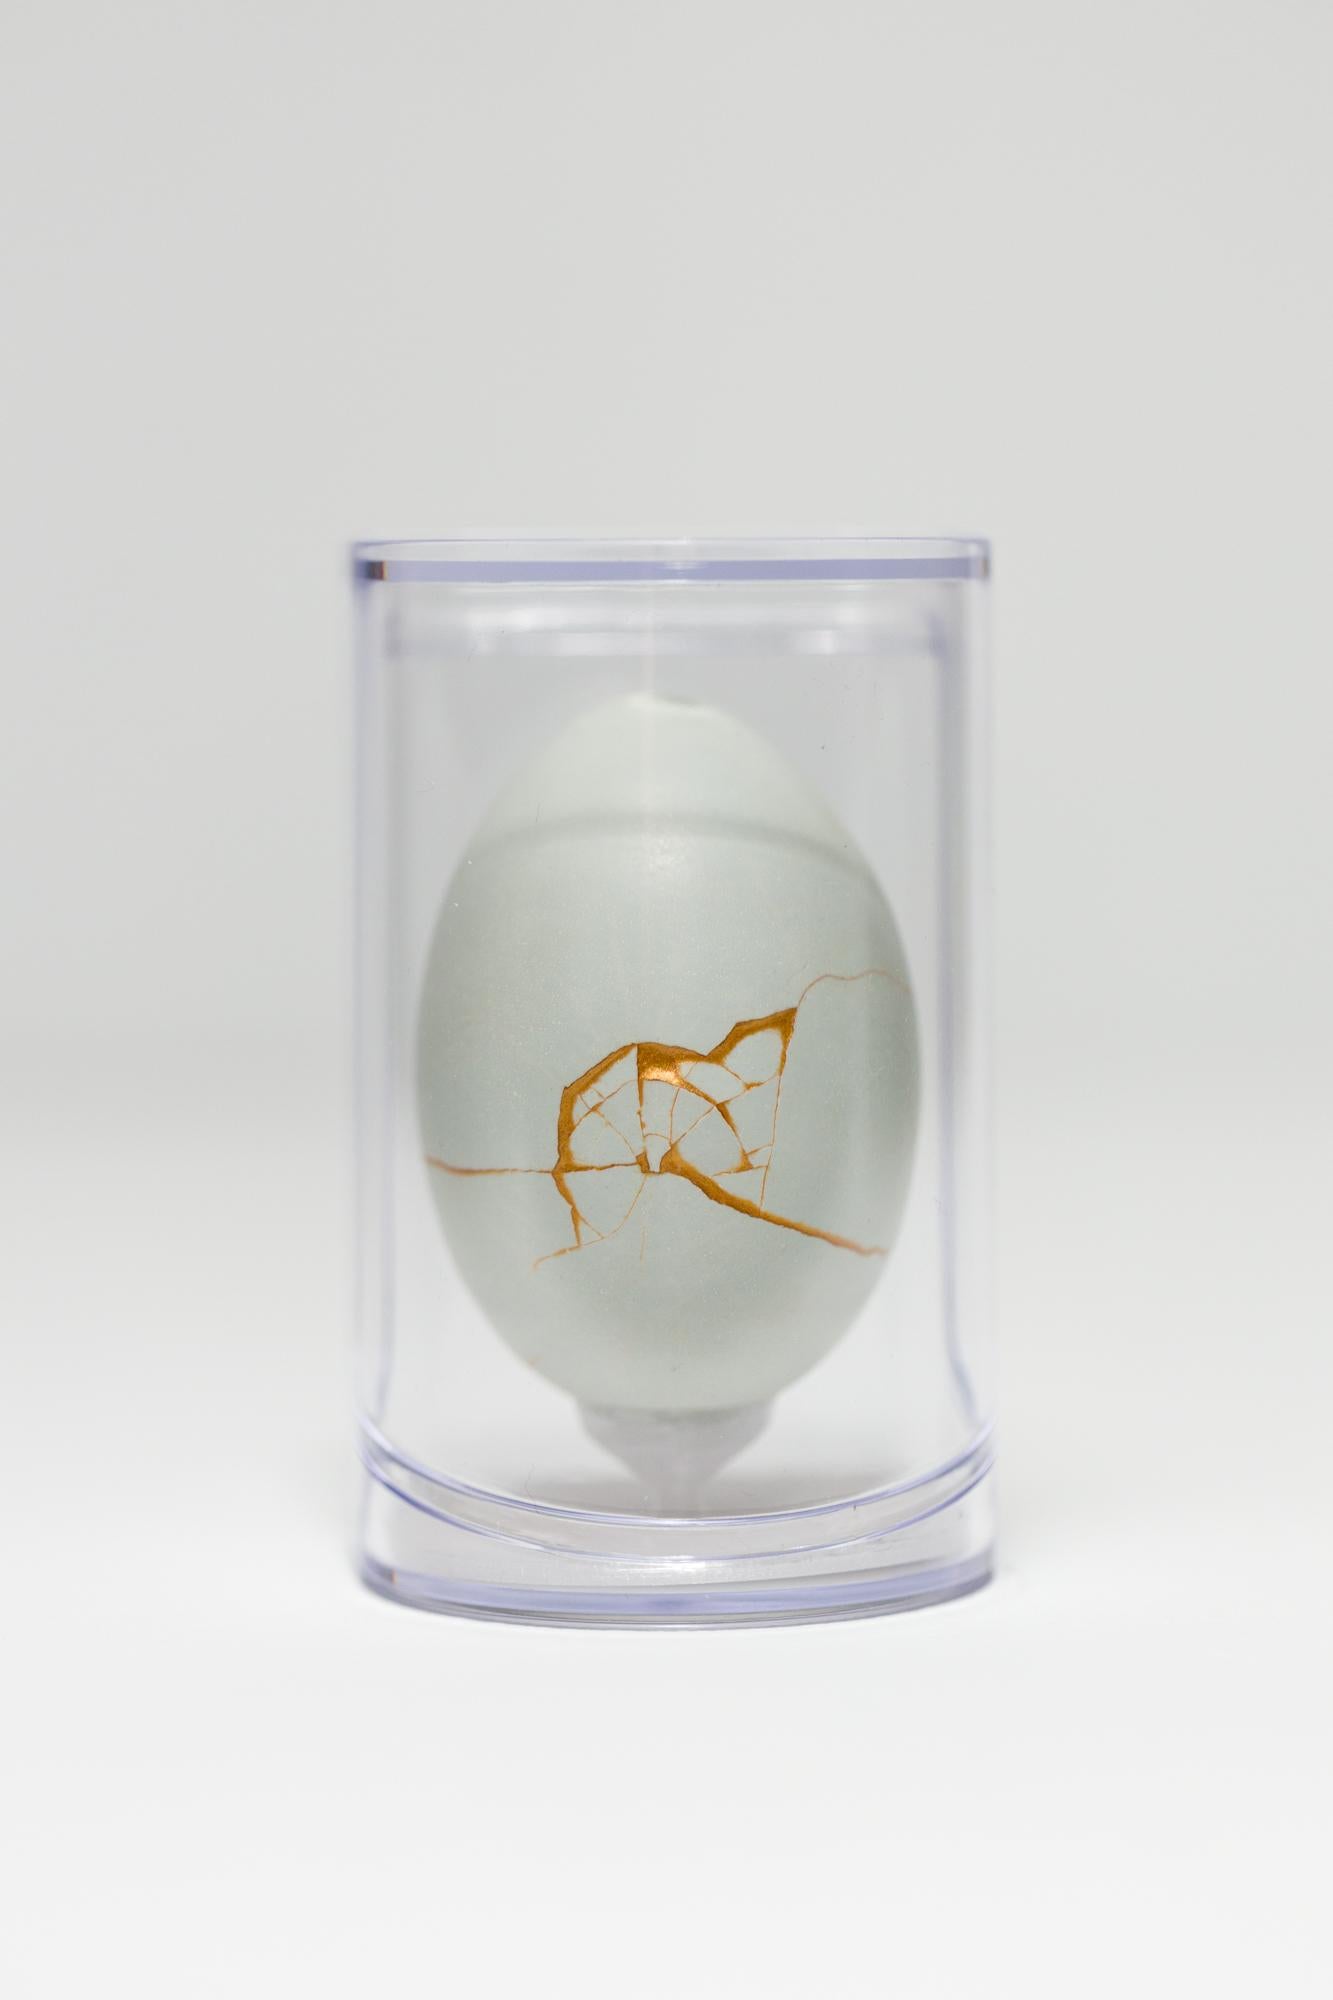 "Day in the Life: Double Yolk #1", Found Object Sculpture, Egg Motif